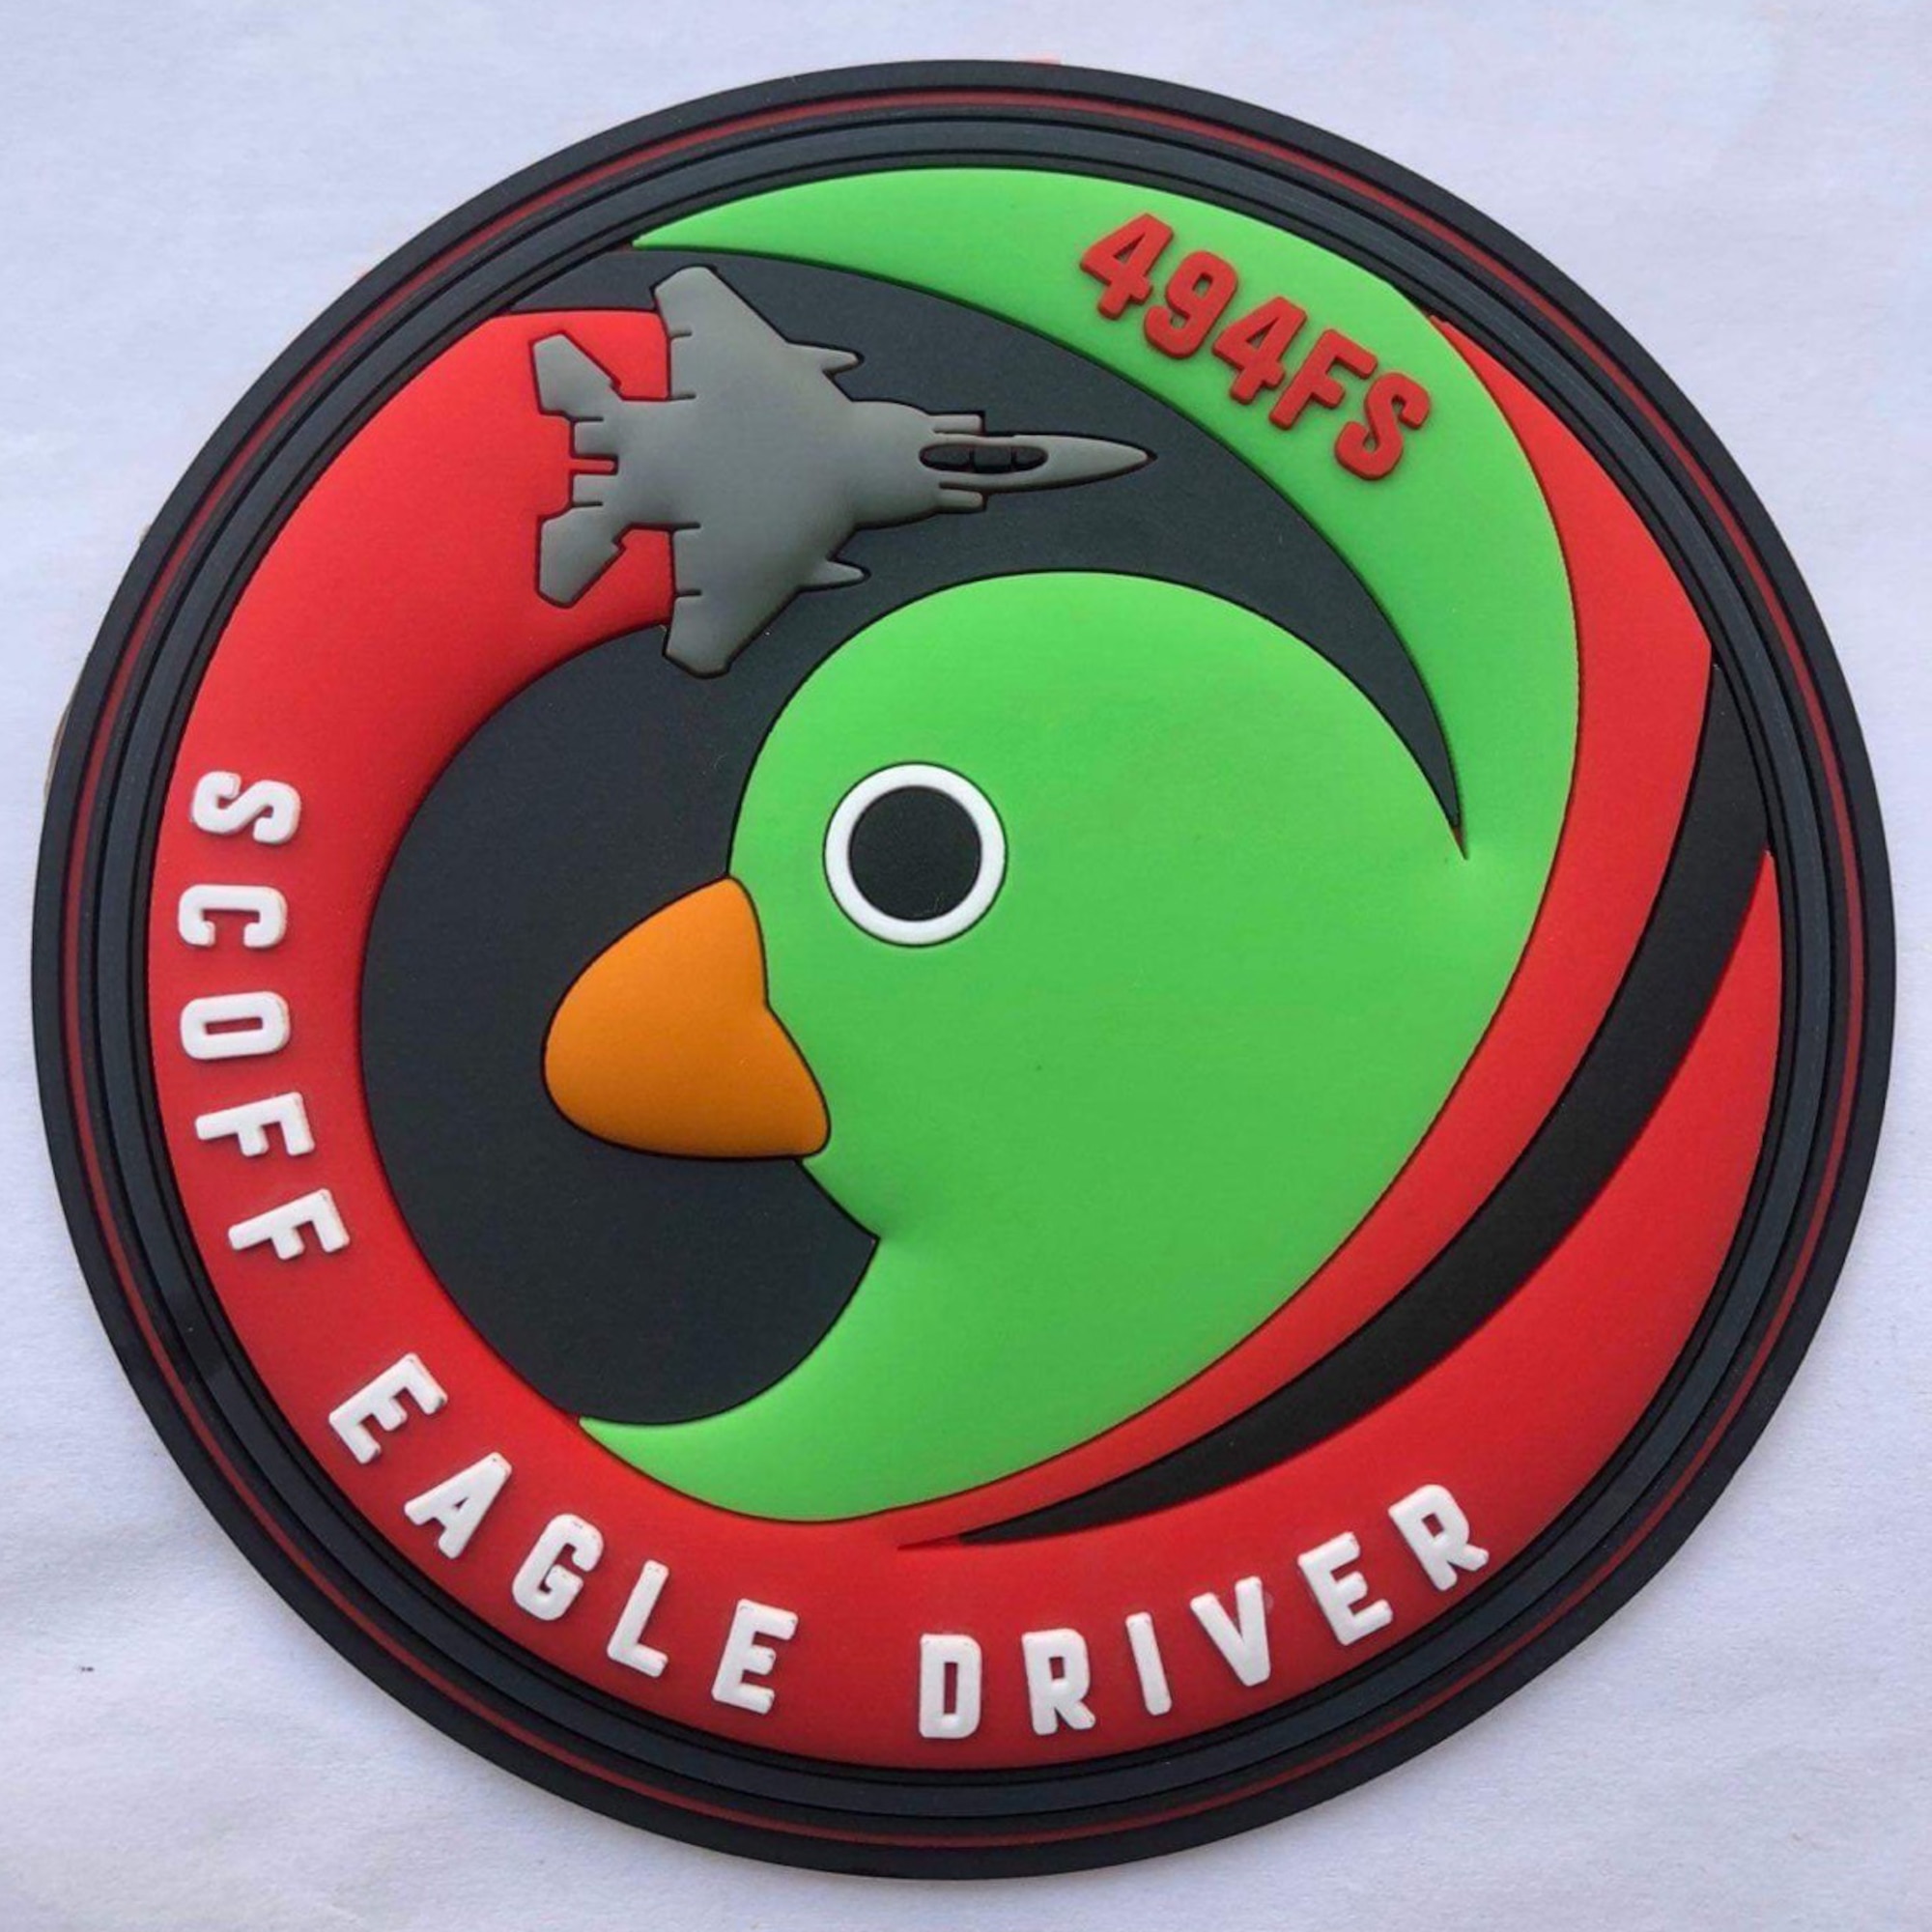 A patch was designed and created in honor of Scoff the Duck by members of the local community surrounding Royal Air Force Lakenheath. The positive relationship between the Liberty Wing and it’s host nation partners can be seen through the continued teamwork and support from the local aviation community. (Courtesy Photo)